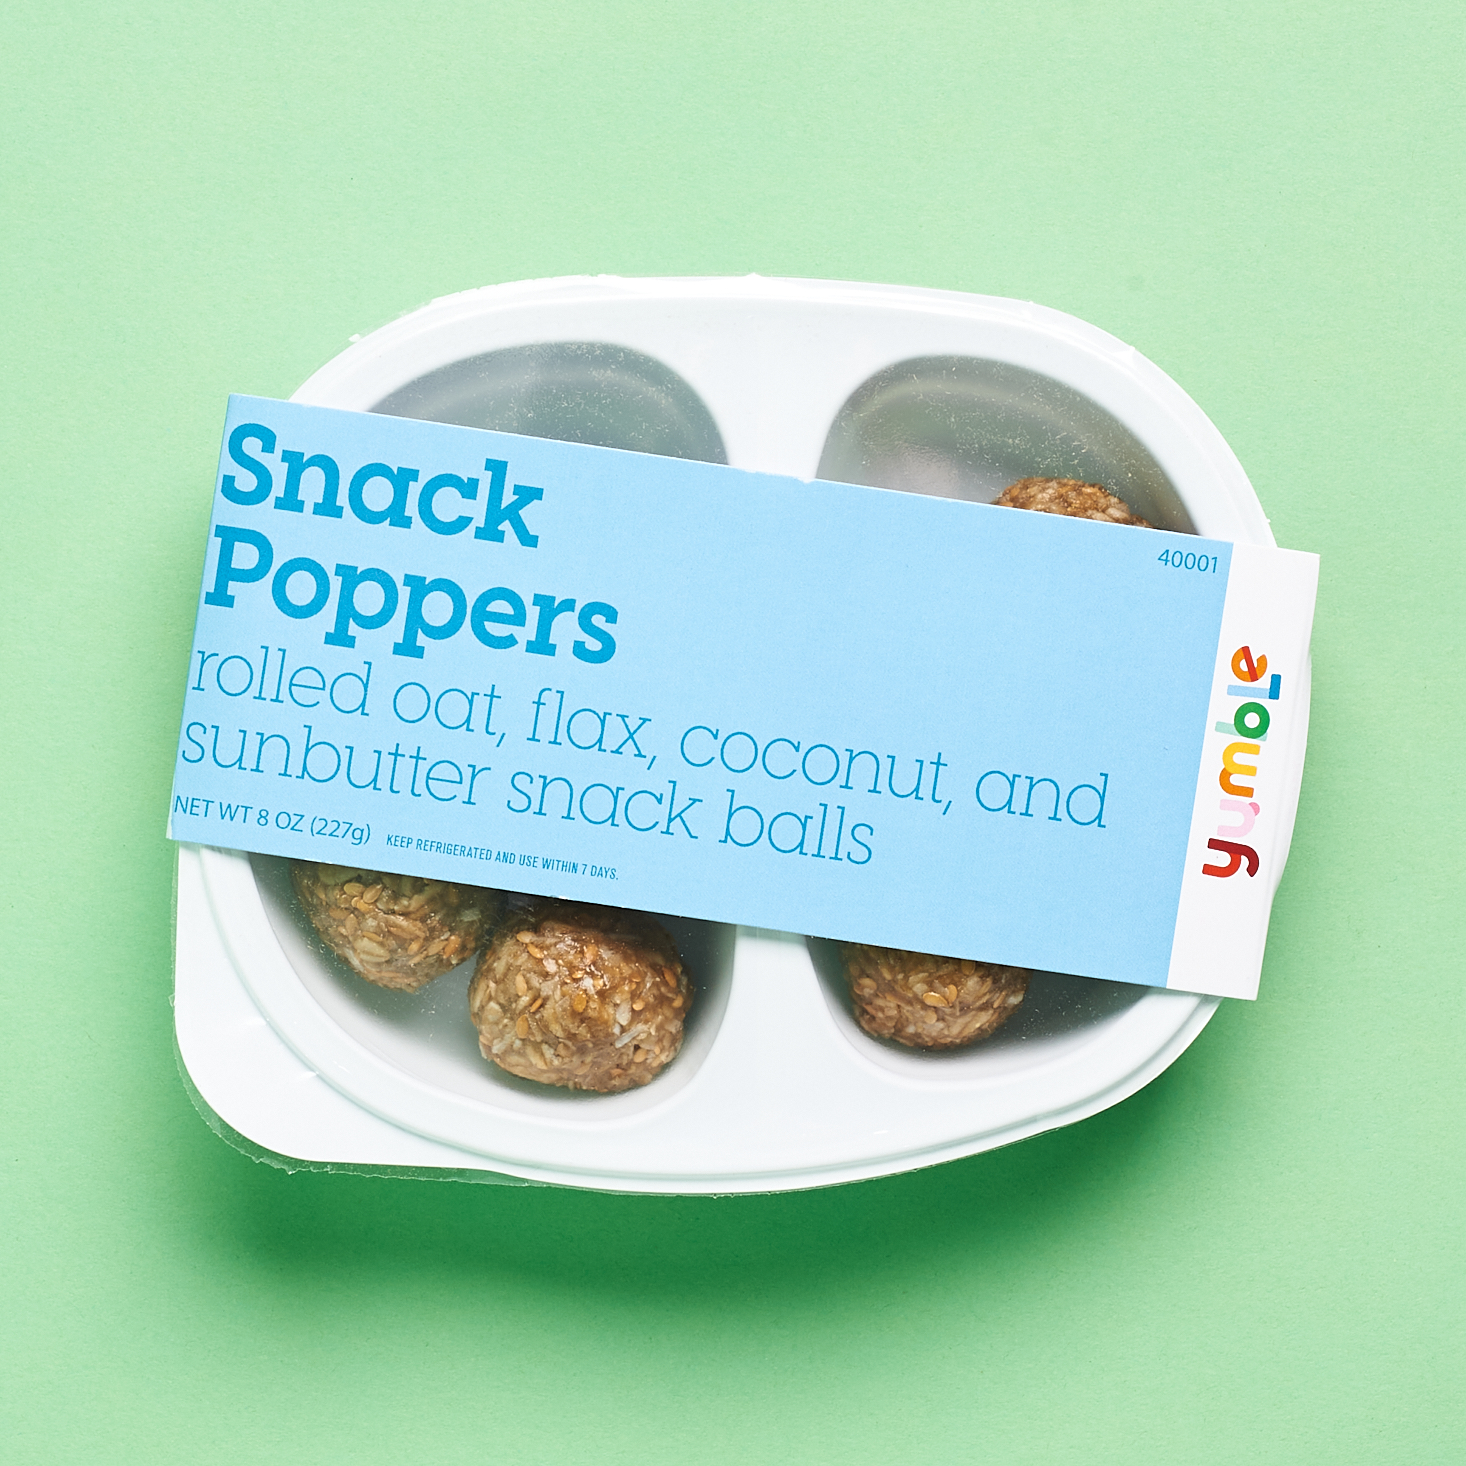 Yumble Subscription snack poppers